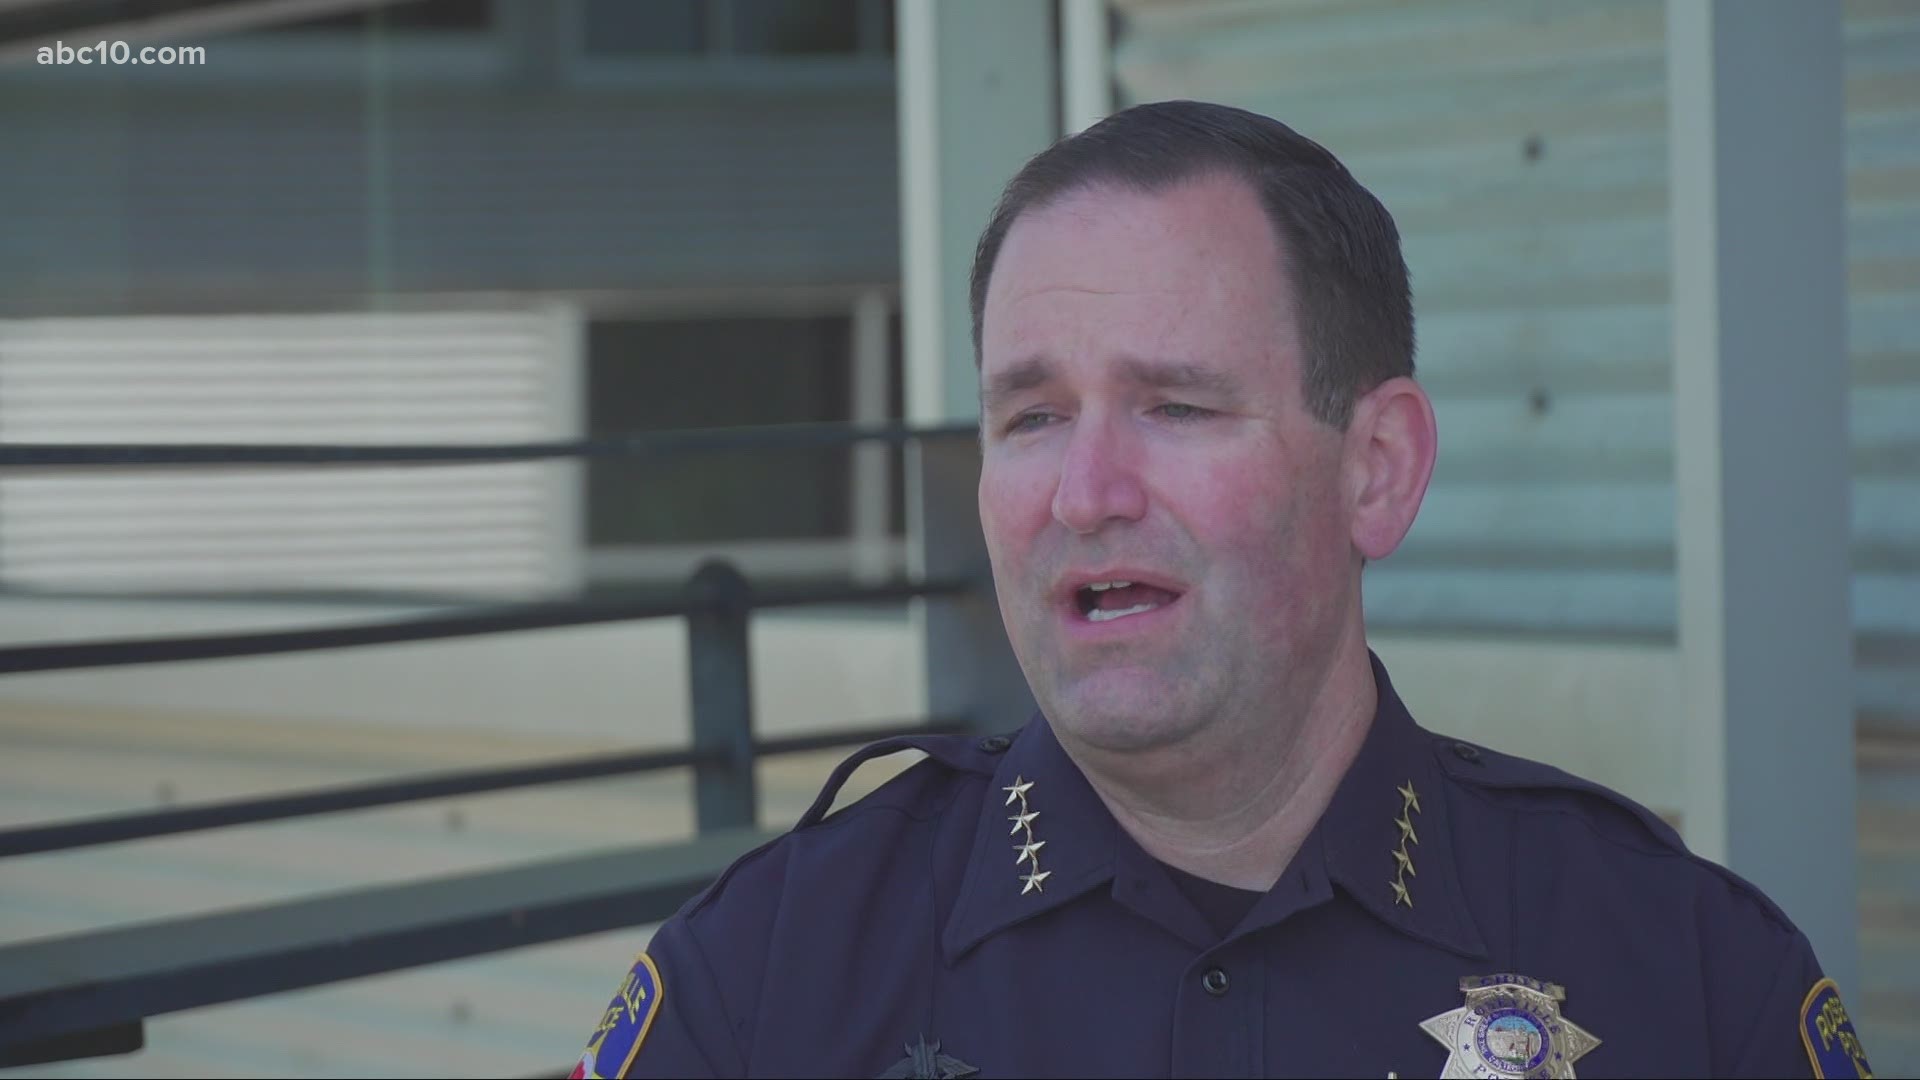 Roseville Police Chief Troy Bergstrom shared with ABC10 about his plans to tackle an uptick in domestic violence and how he wants to roll out body cams to officers.